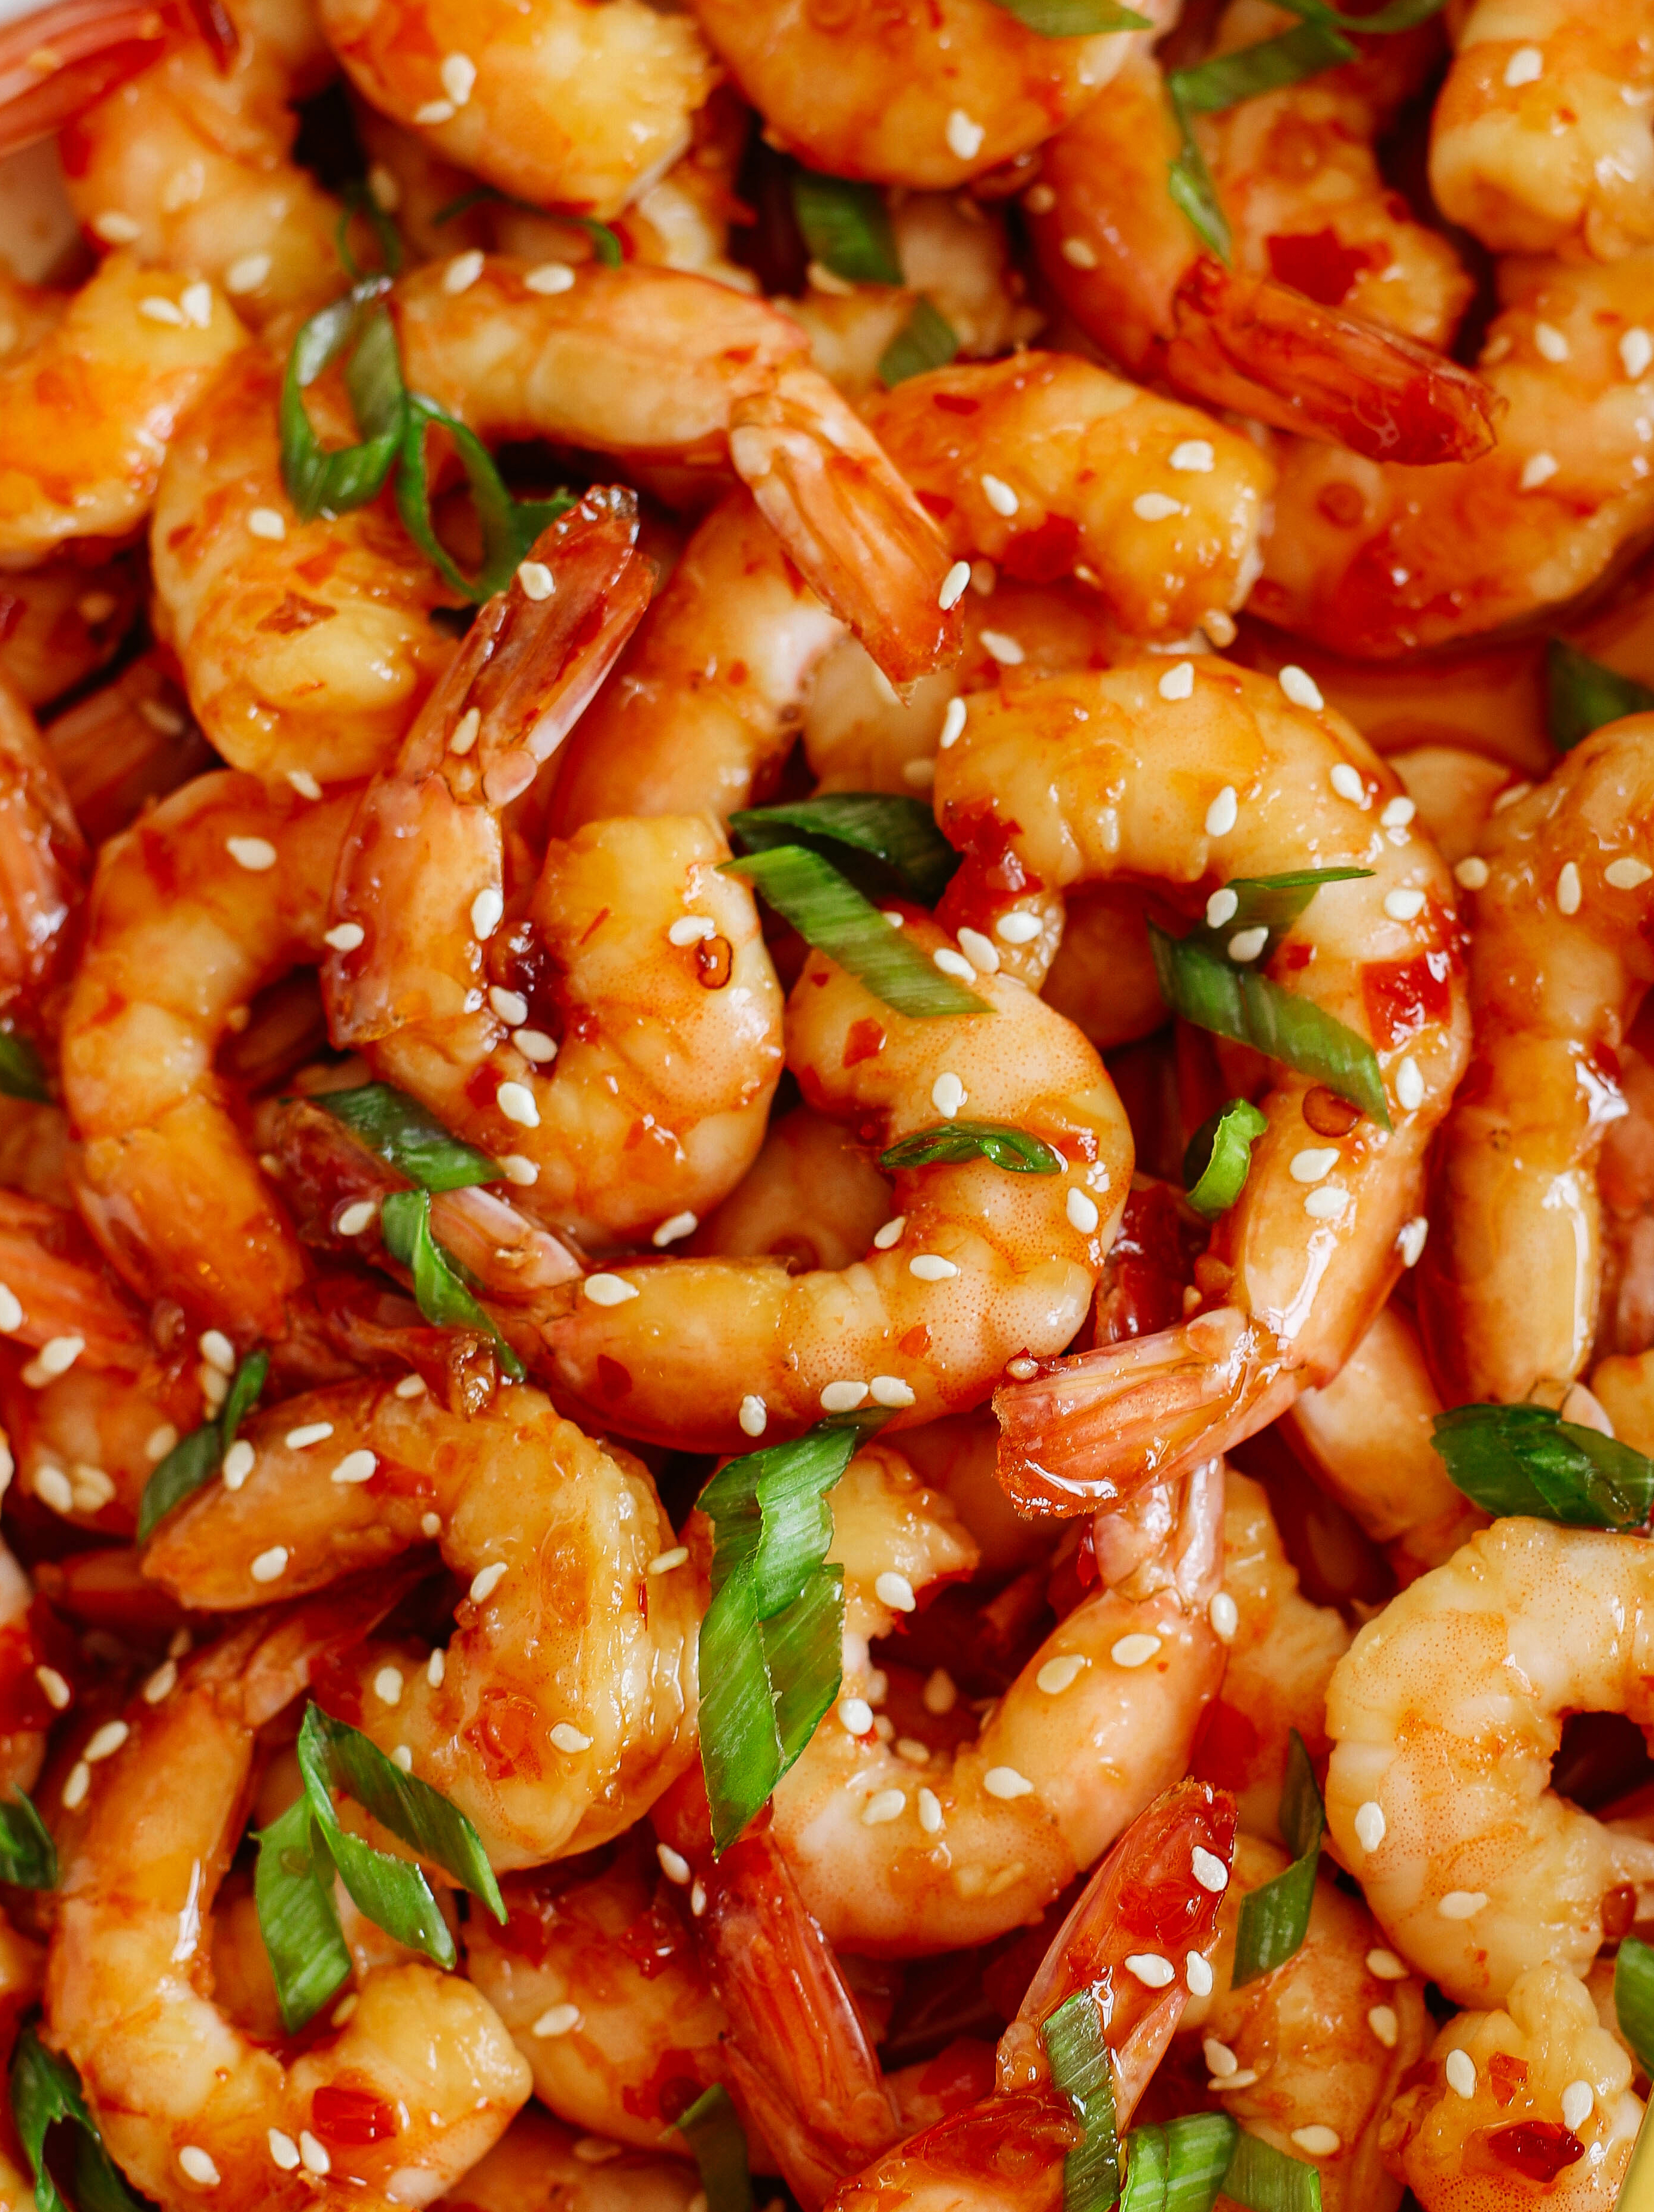 Sweet and flavorful Skillet Chili Garlic and Lime Shrimp that tastes amazing and is ready in just minutes!  Perfect as an appetizer, on top of a salad or even as a main dish!